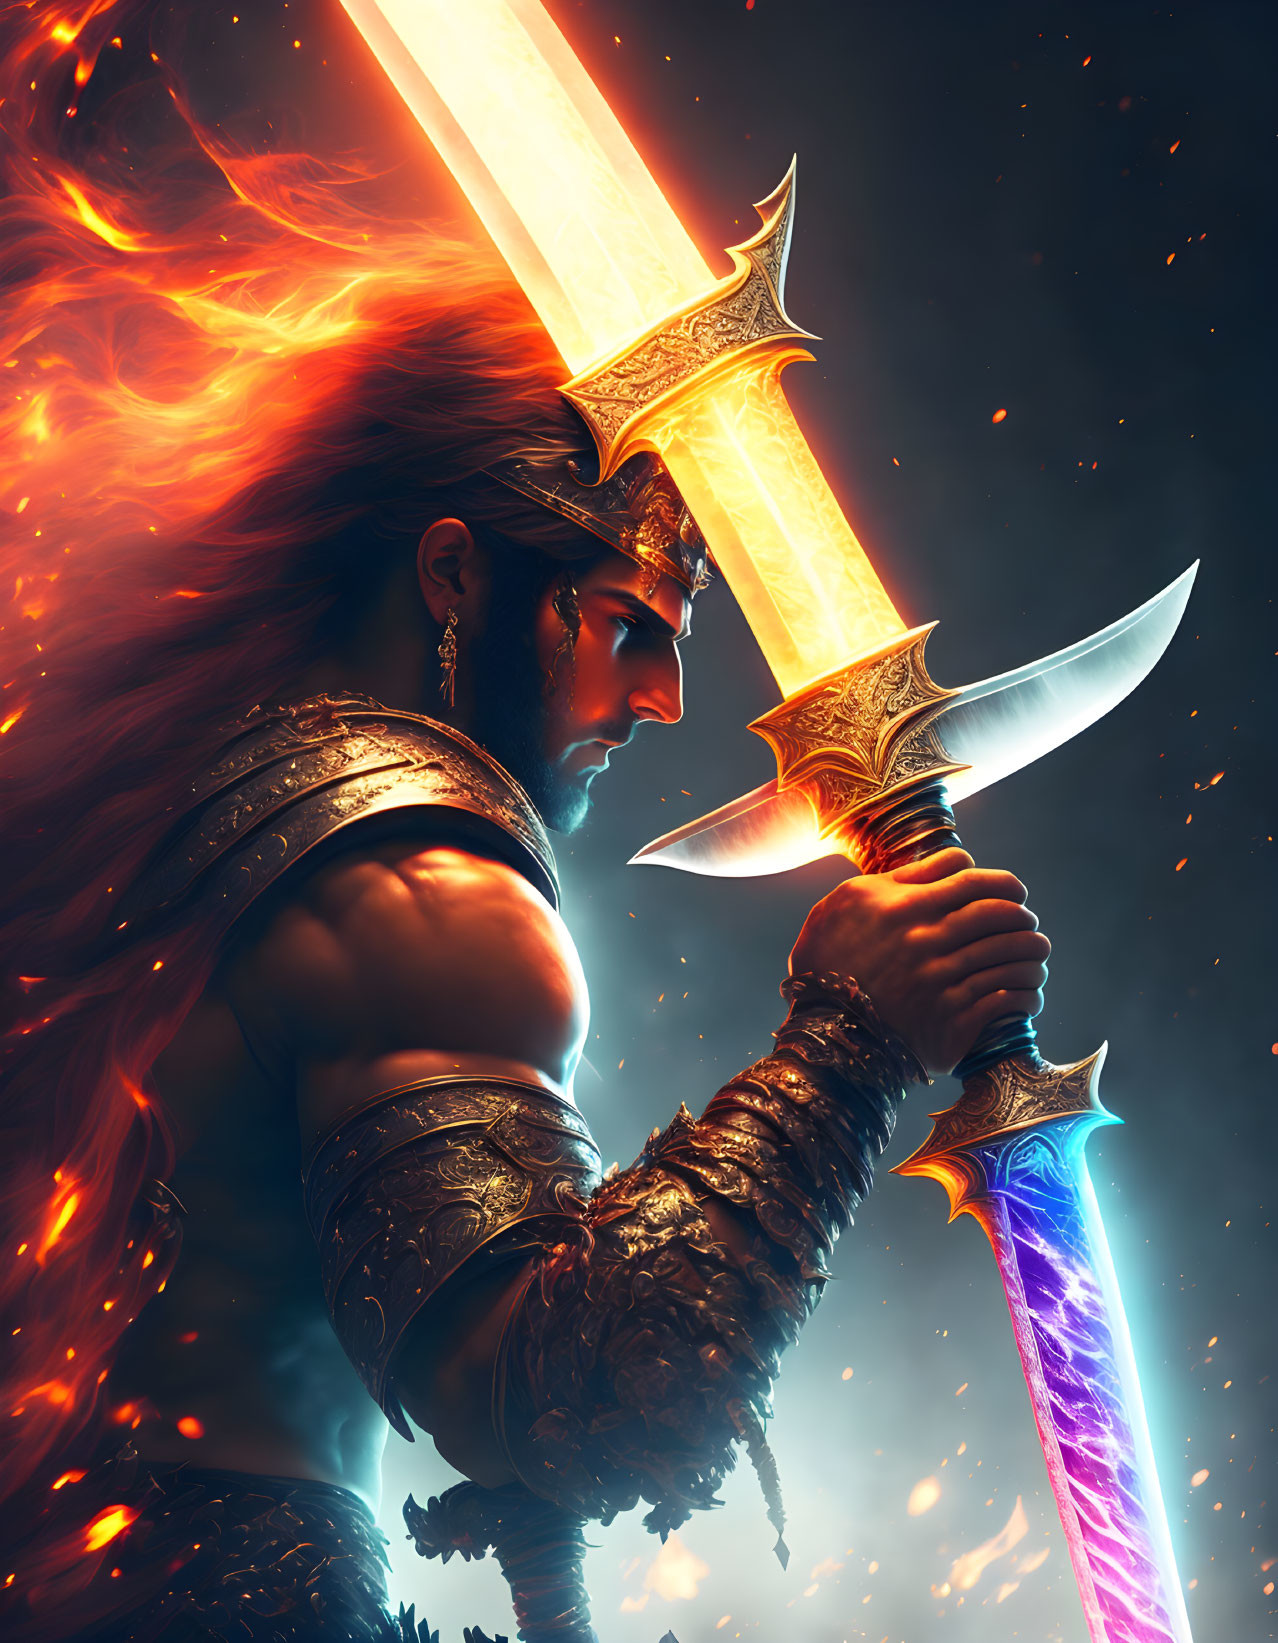 Warrior with blazing sword and glowing blade in fiery cosmic backdrop